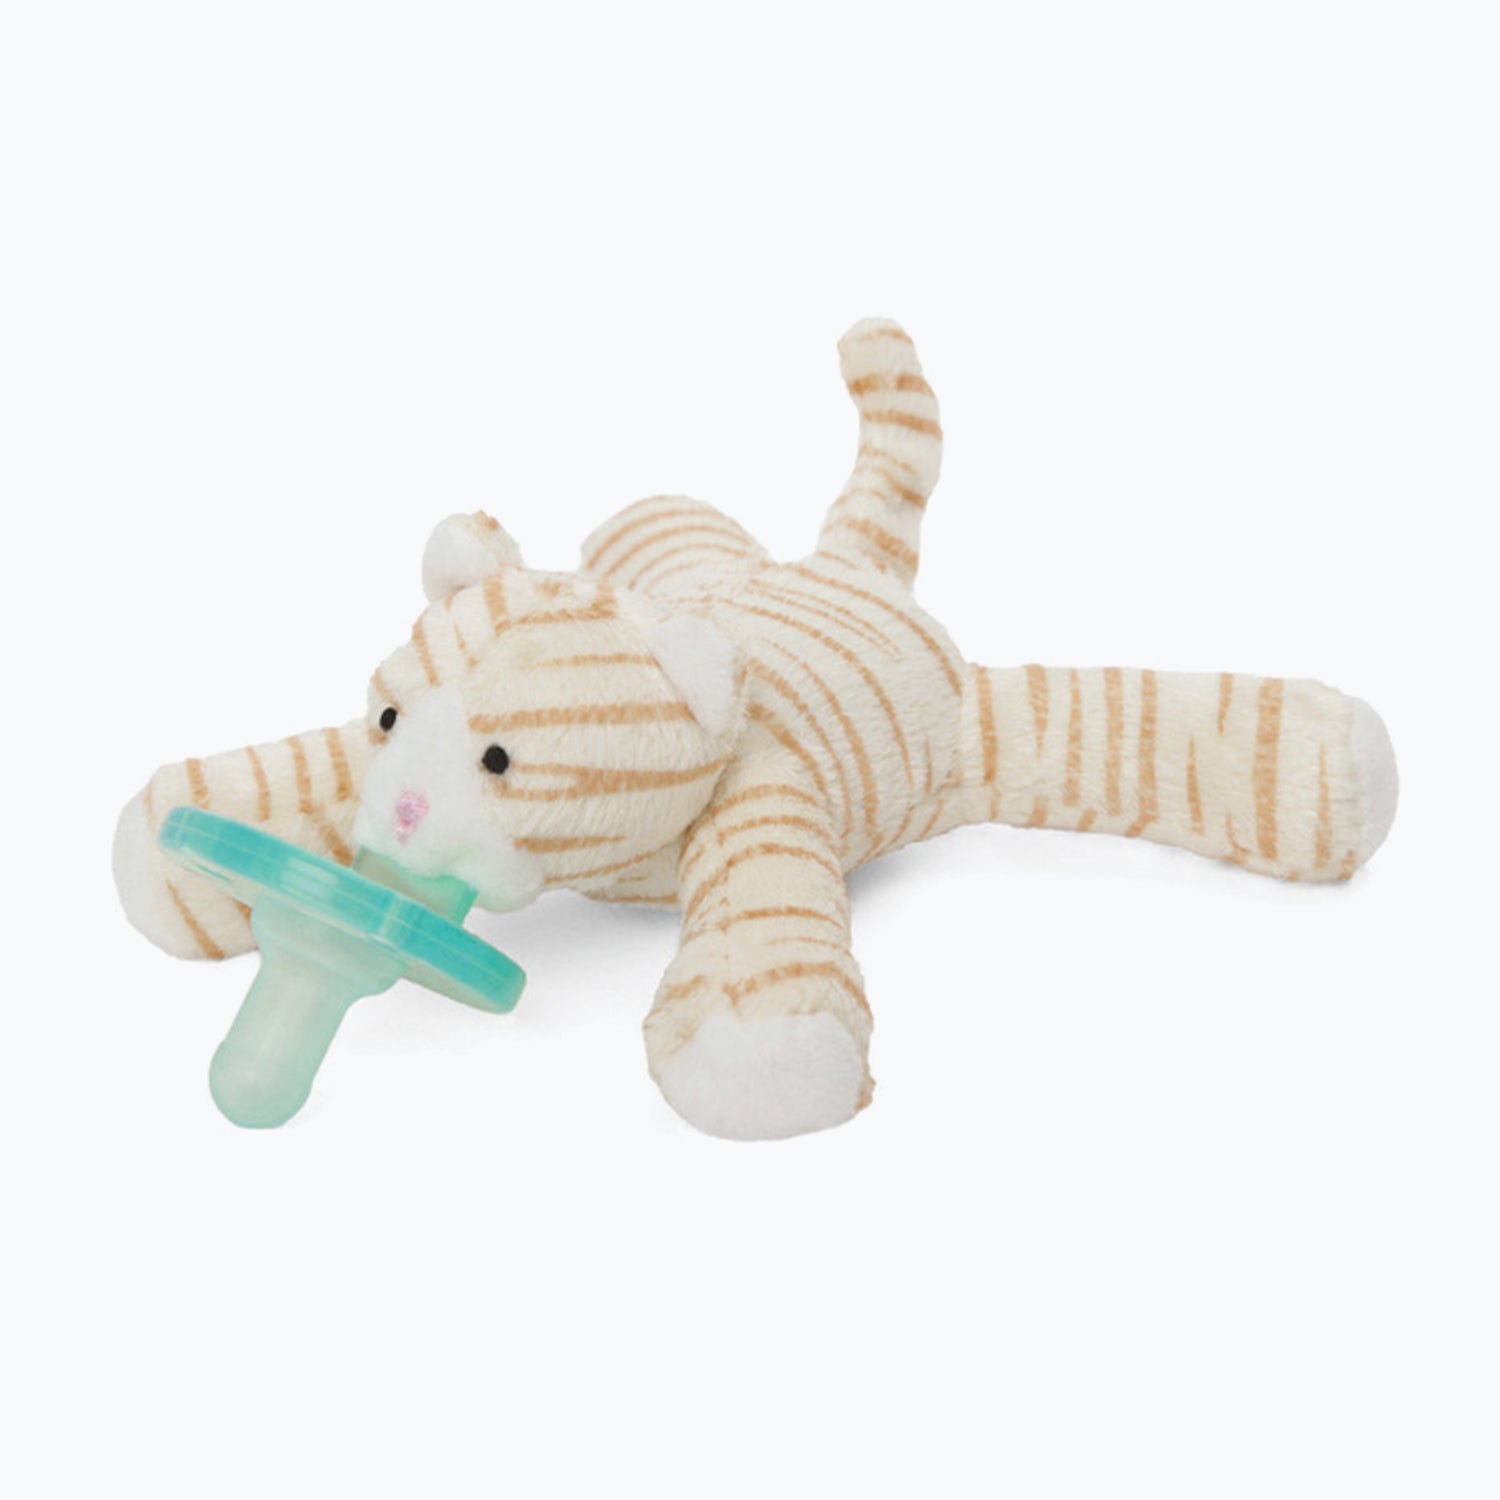 An image of Baby Pacifier - Pacifier and Comforter Toy - Tabby Cat | WubbaNub